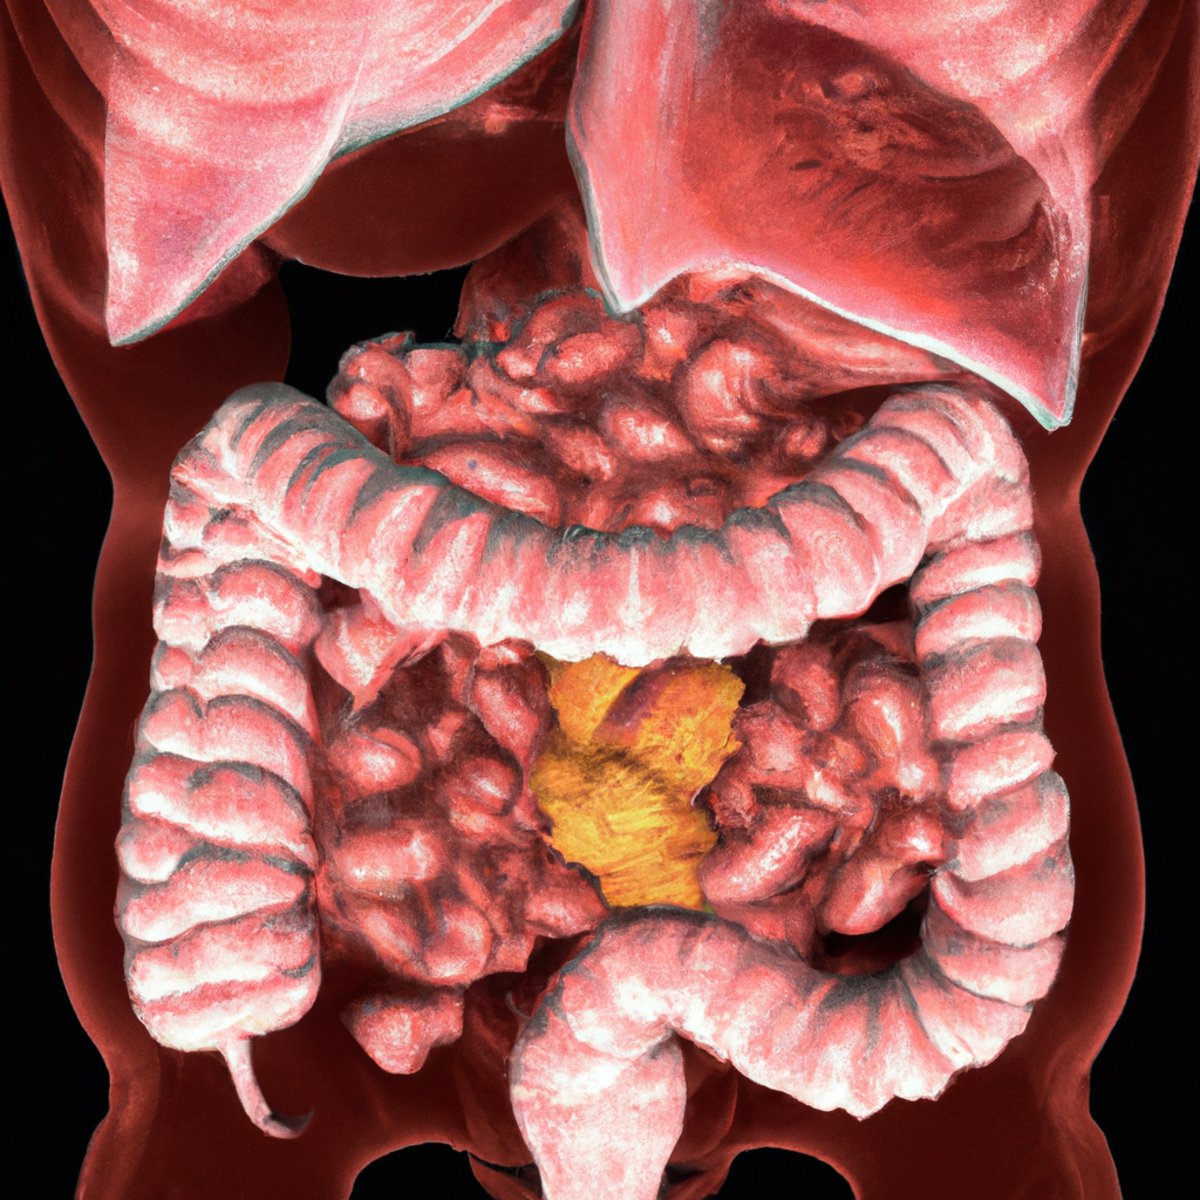 Close-up of inflamed stomach with prominent folds and ridges, depicting Menetrier's Disease.